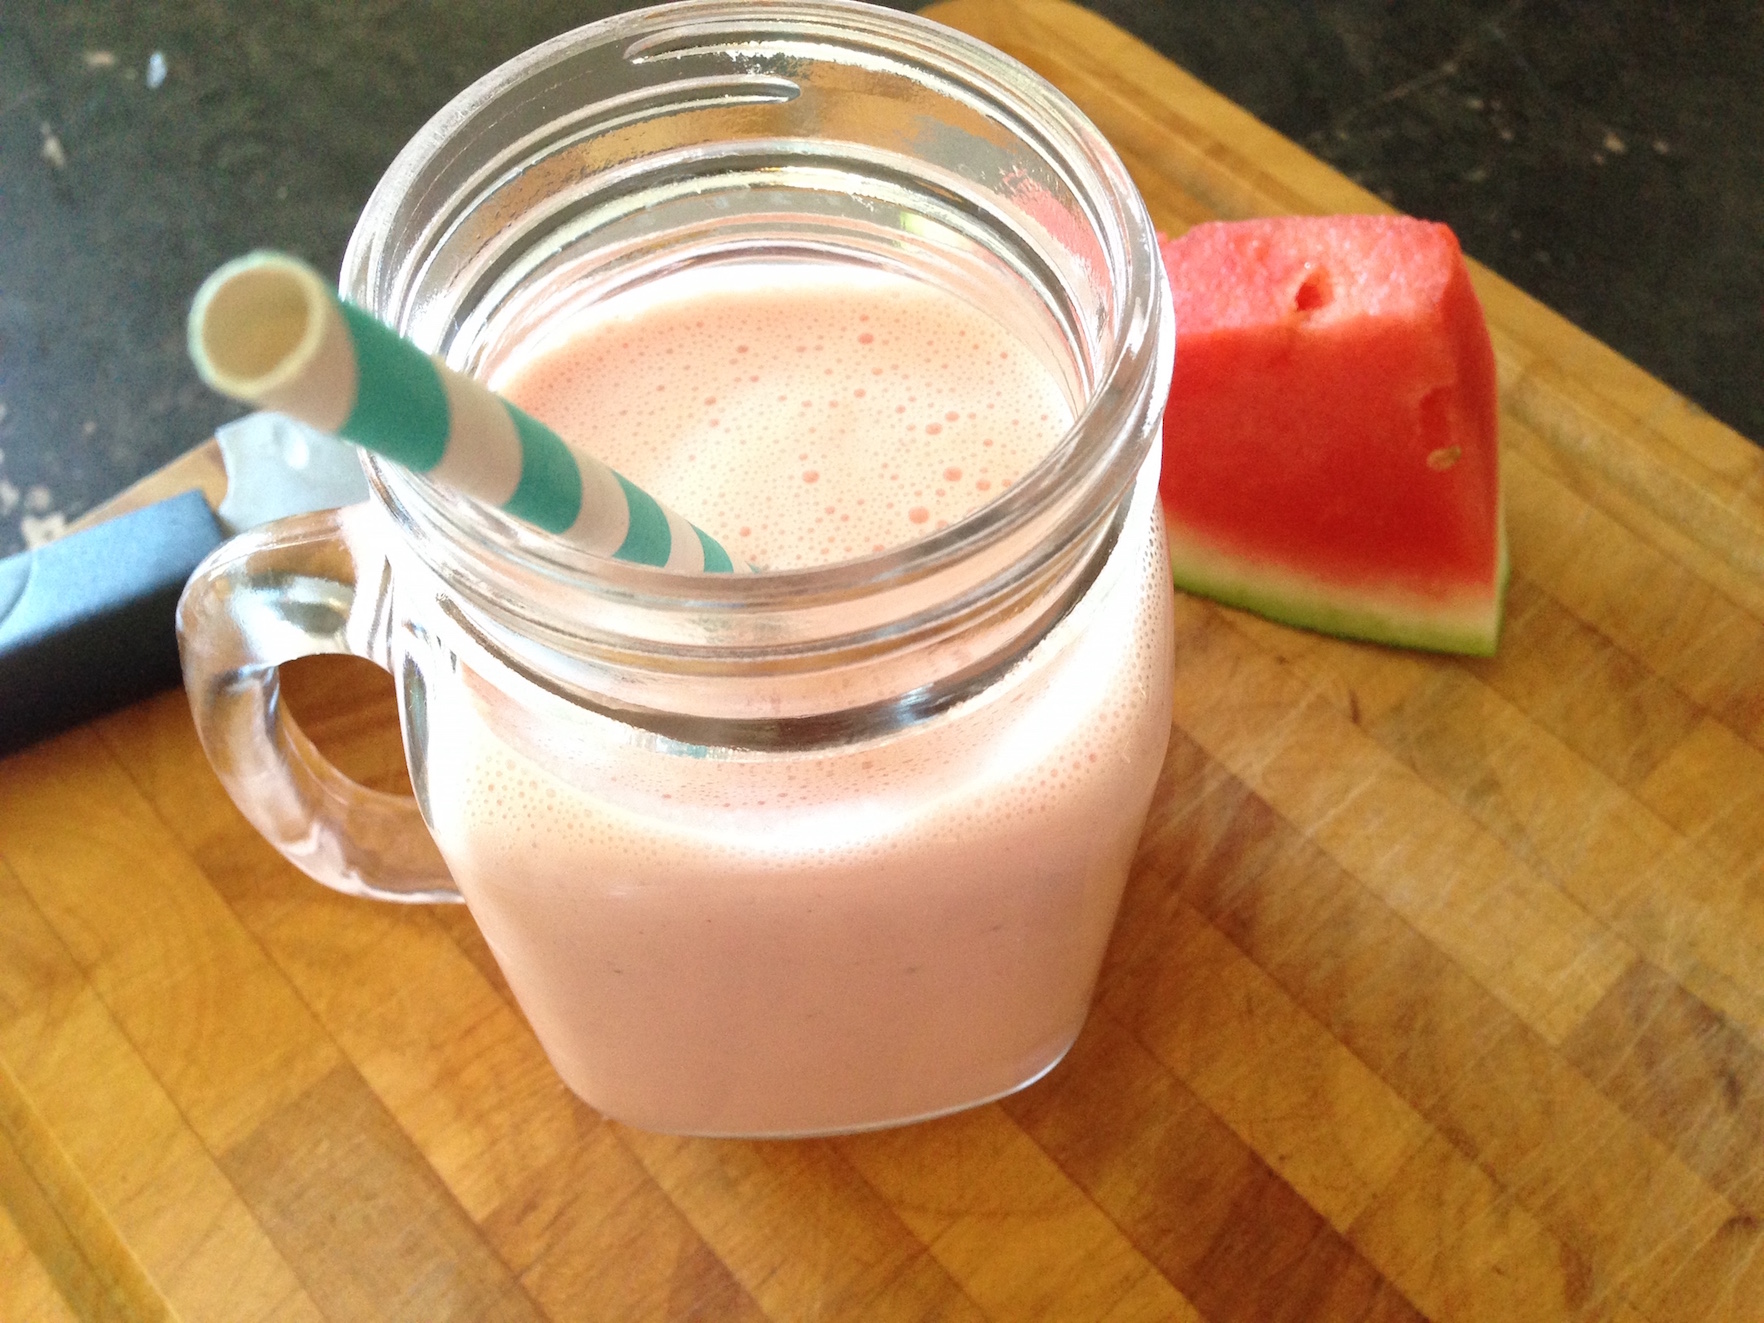 This strawberry and watermelon smoothie is refreshing and nourishing after a hard workout